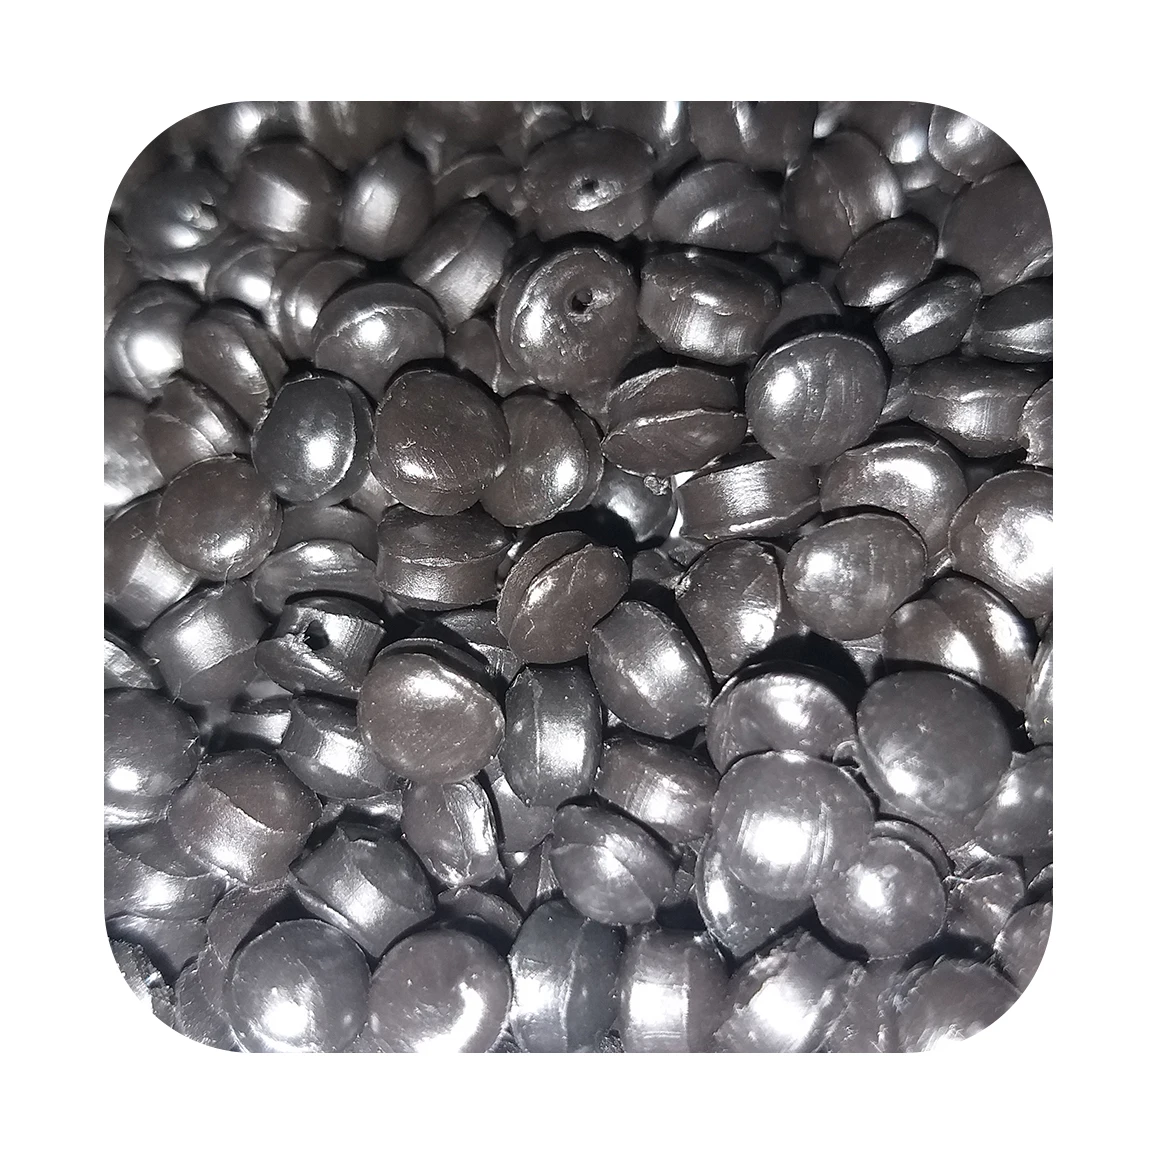 Recycled Granulated Plastic Polymer Polypropylene (polypropylène), Round Shape, Industrial/Business Usage, Lowest Prices on The Market